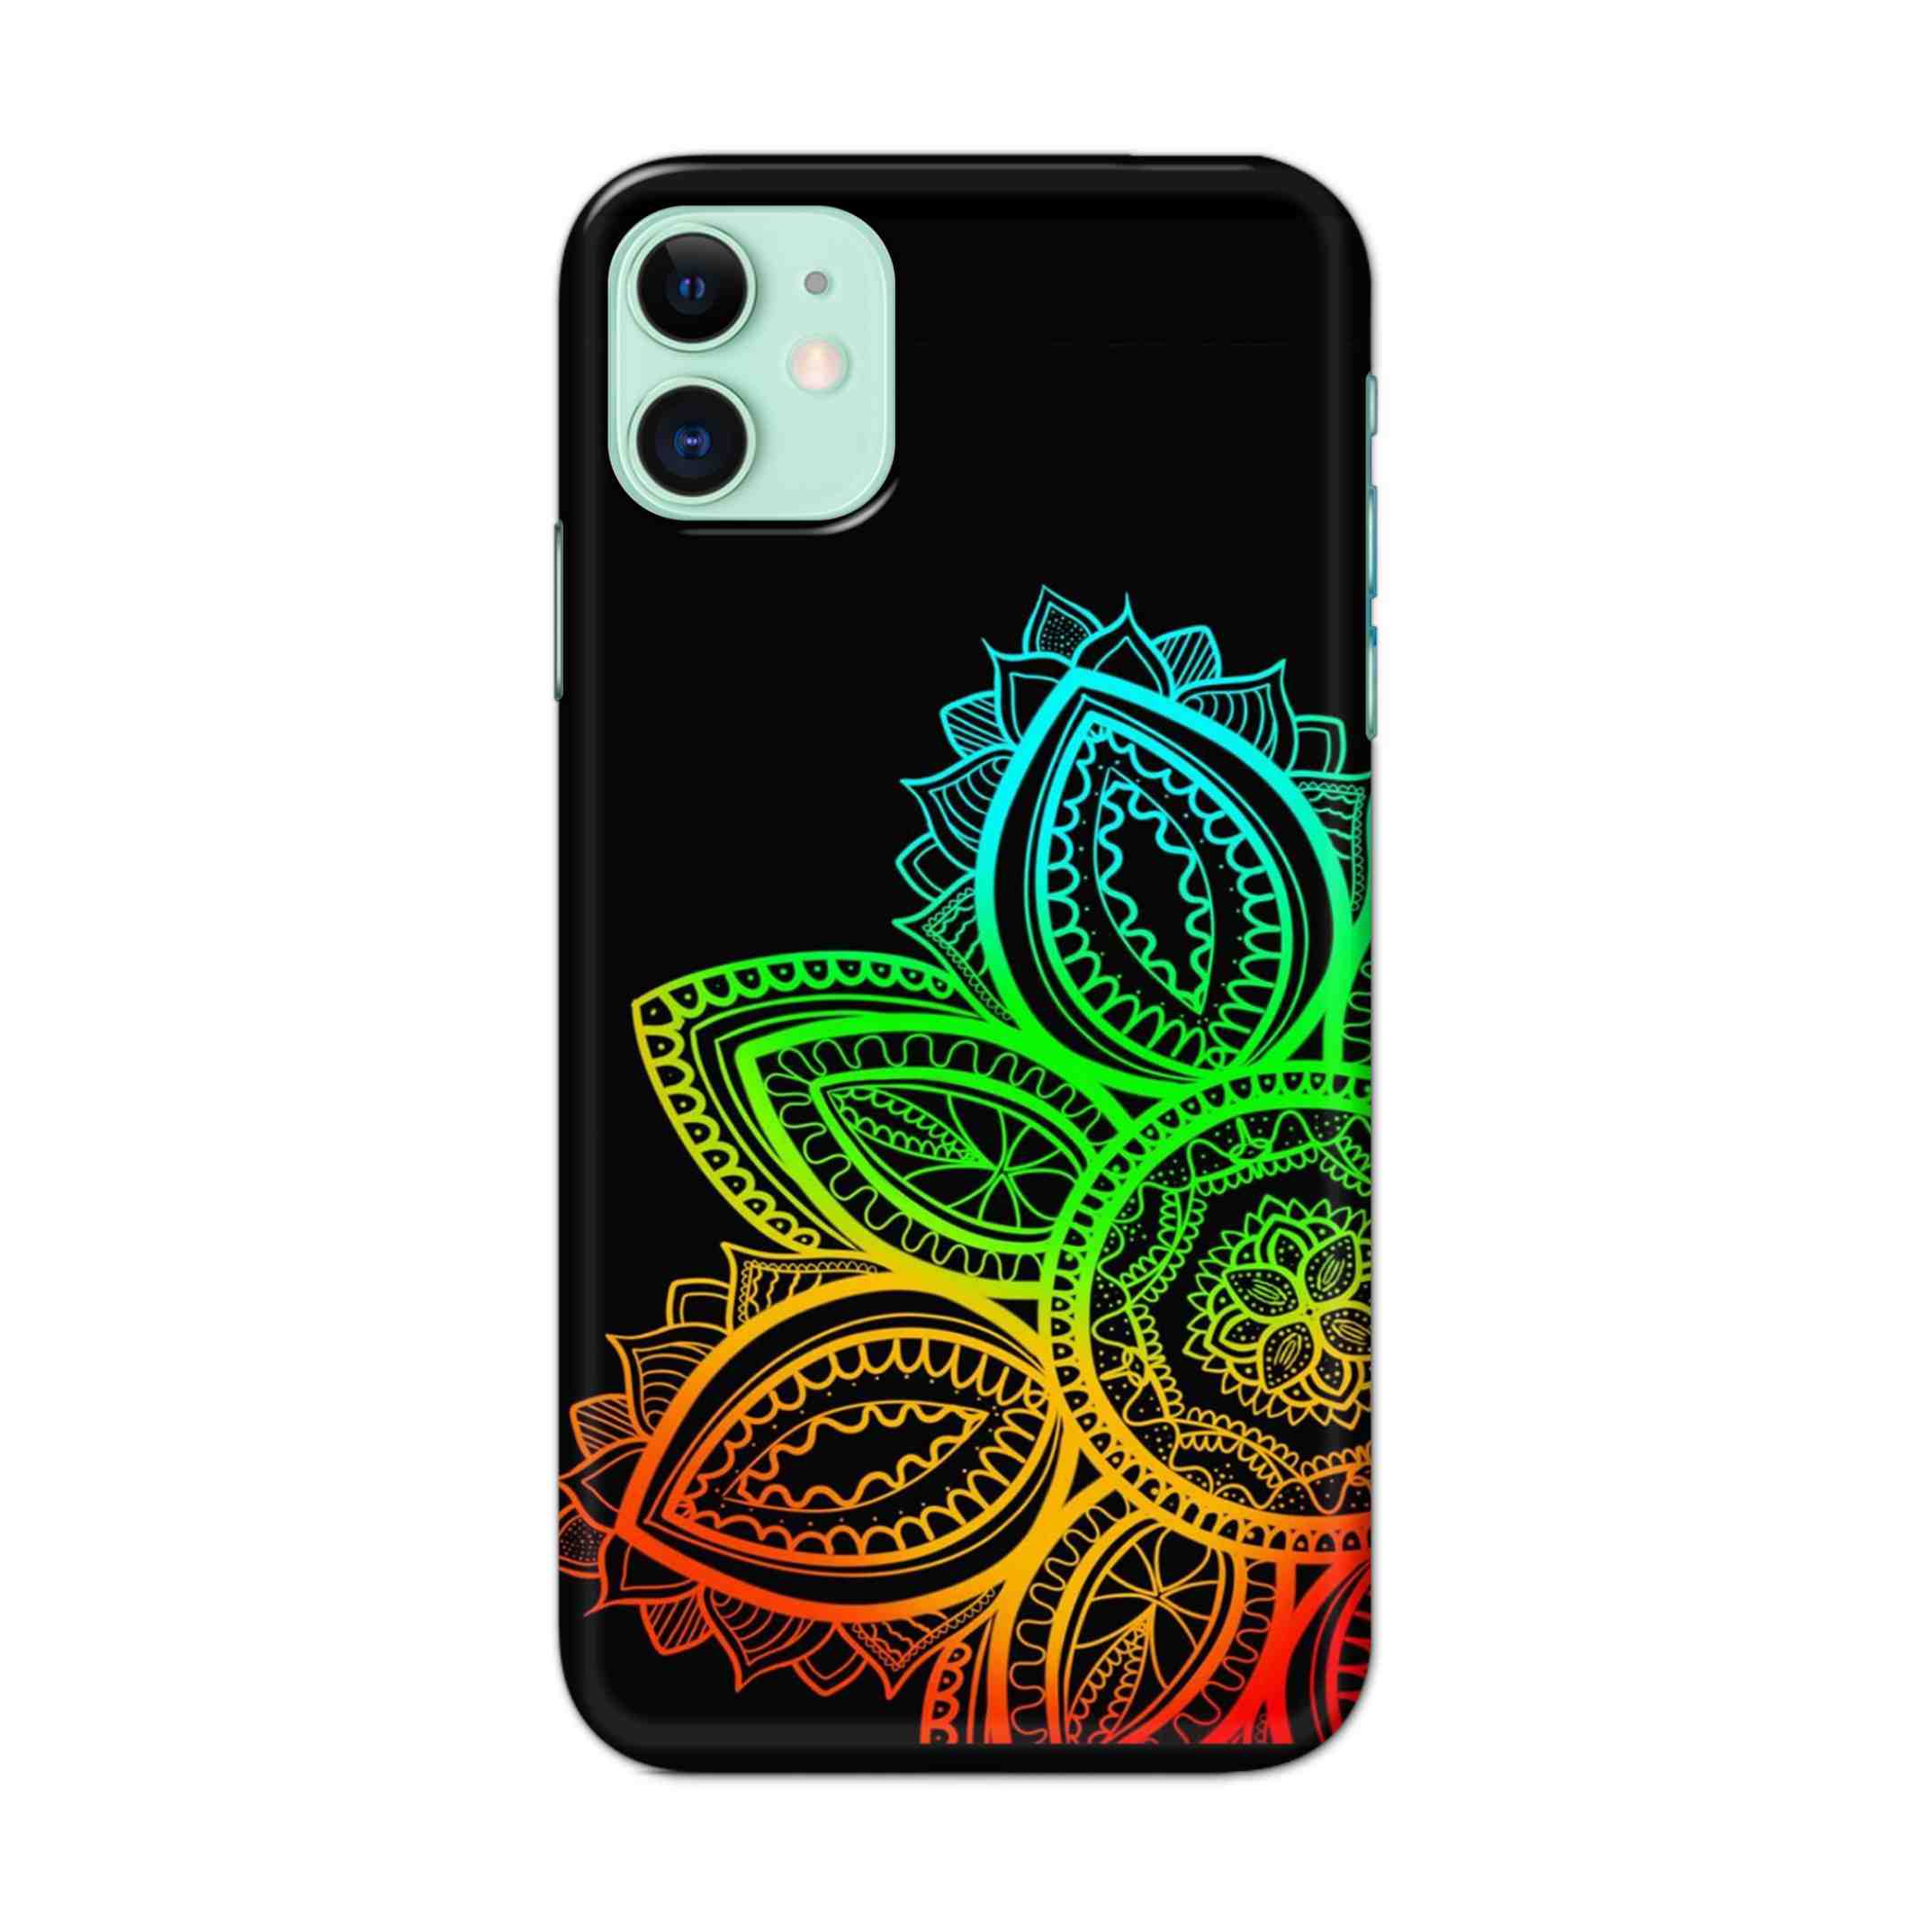 Buy Neon Mandala Hard Back Mobile Phone Case/Cover For iPhone 11 Online